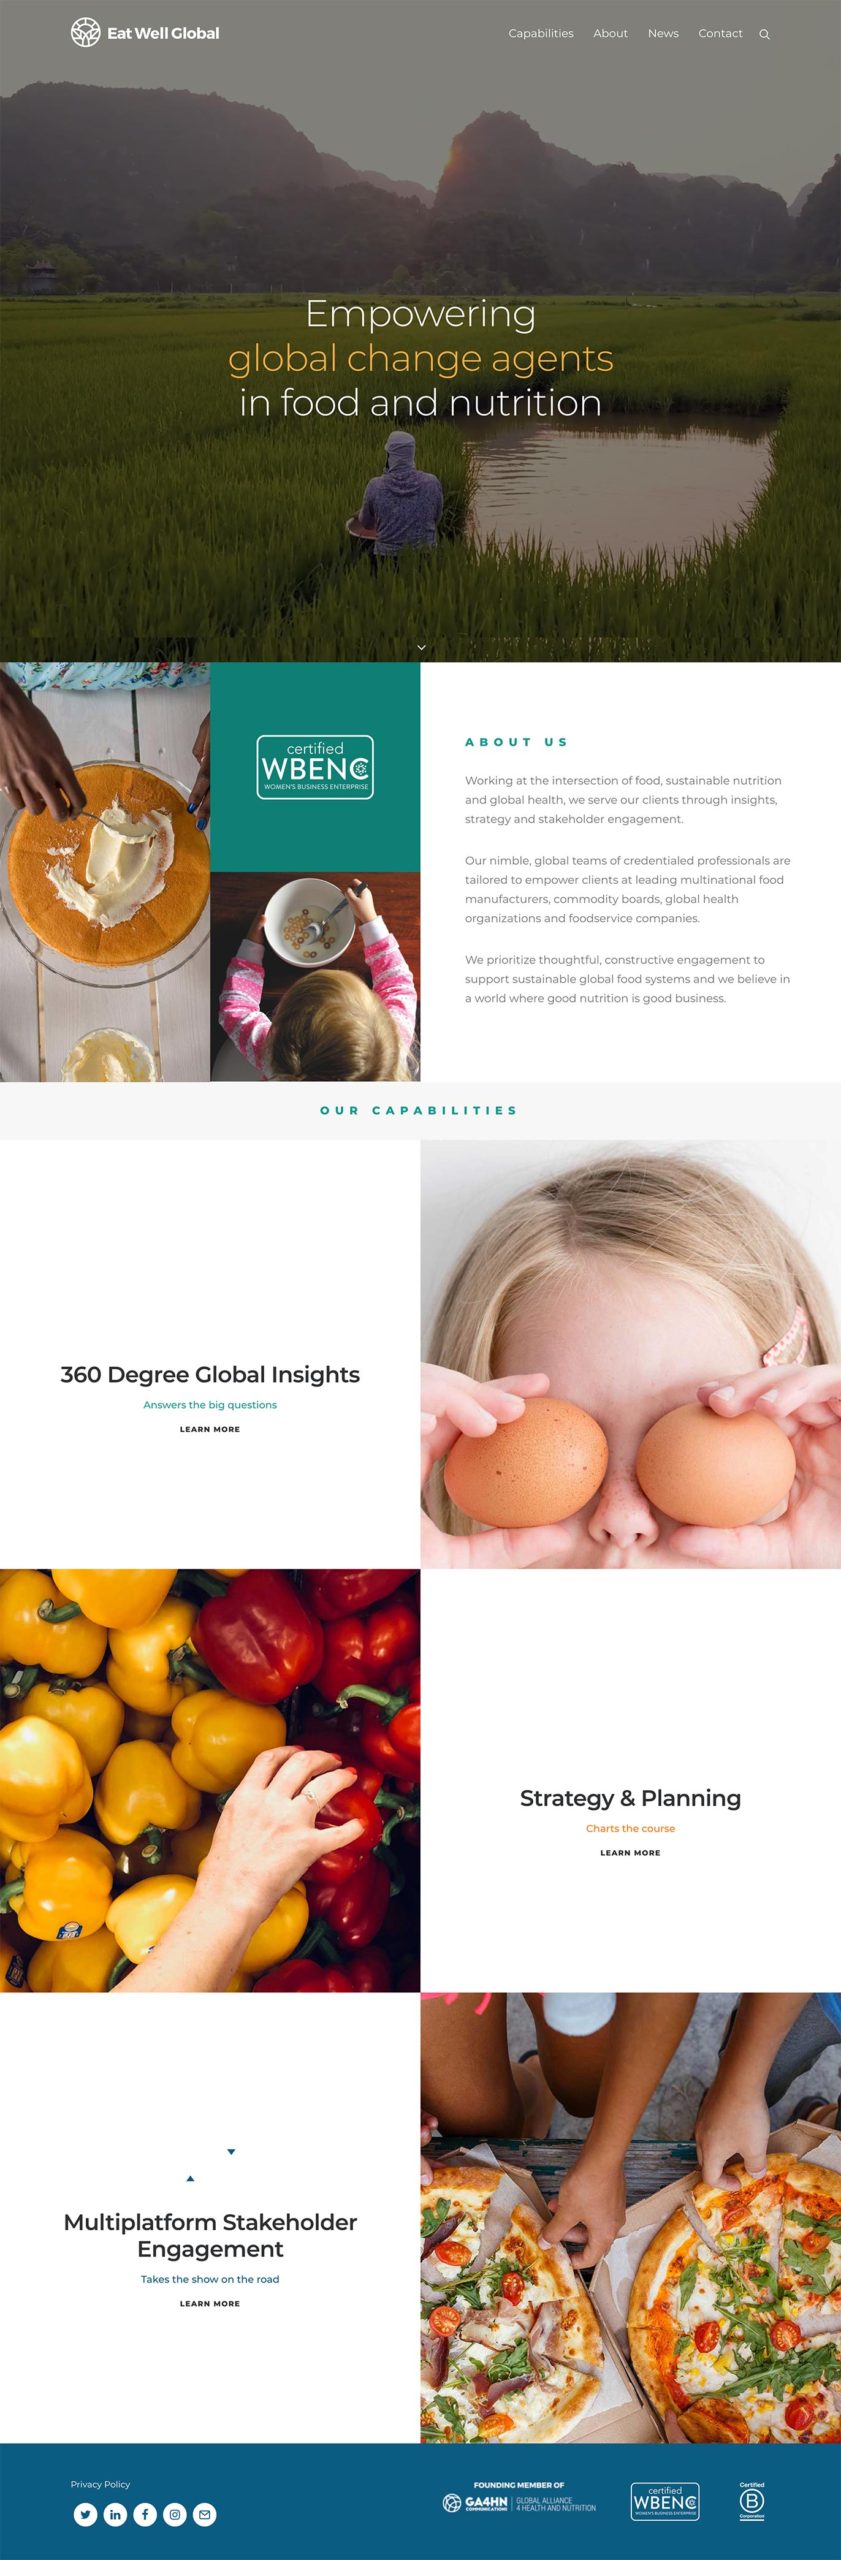 Screenshot of the Eat Well Global home page.